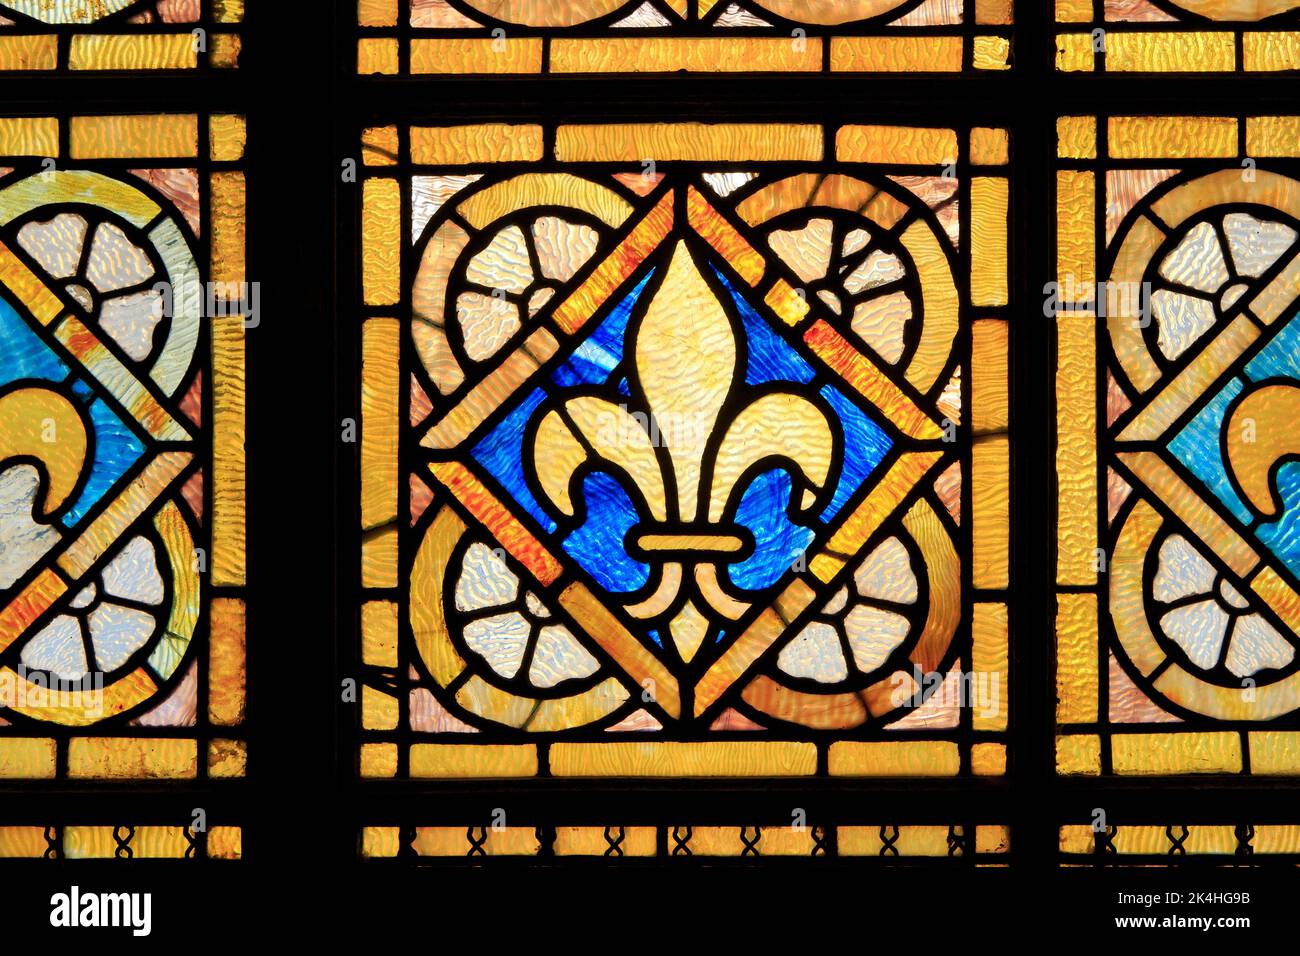 A fleur-de-lys stained glass window (symbol of the kings of France) at the basilica of Bois-Chenu in Domrémy-la-Pucelle (Vosges), France Stock Photo